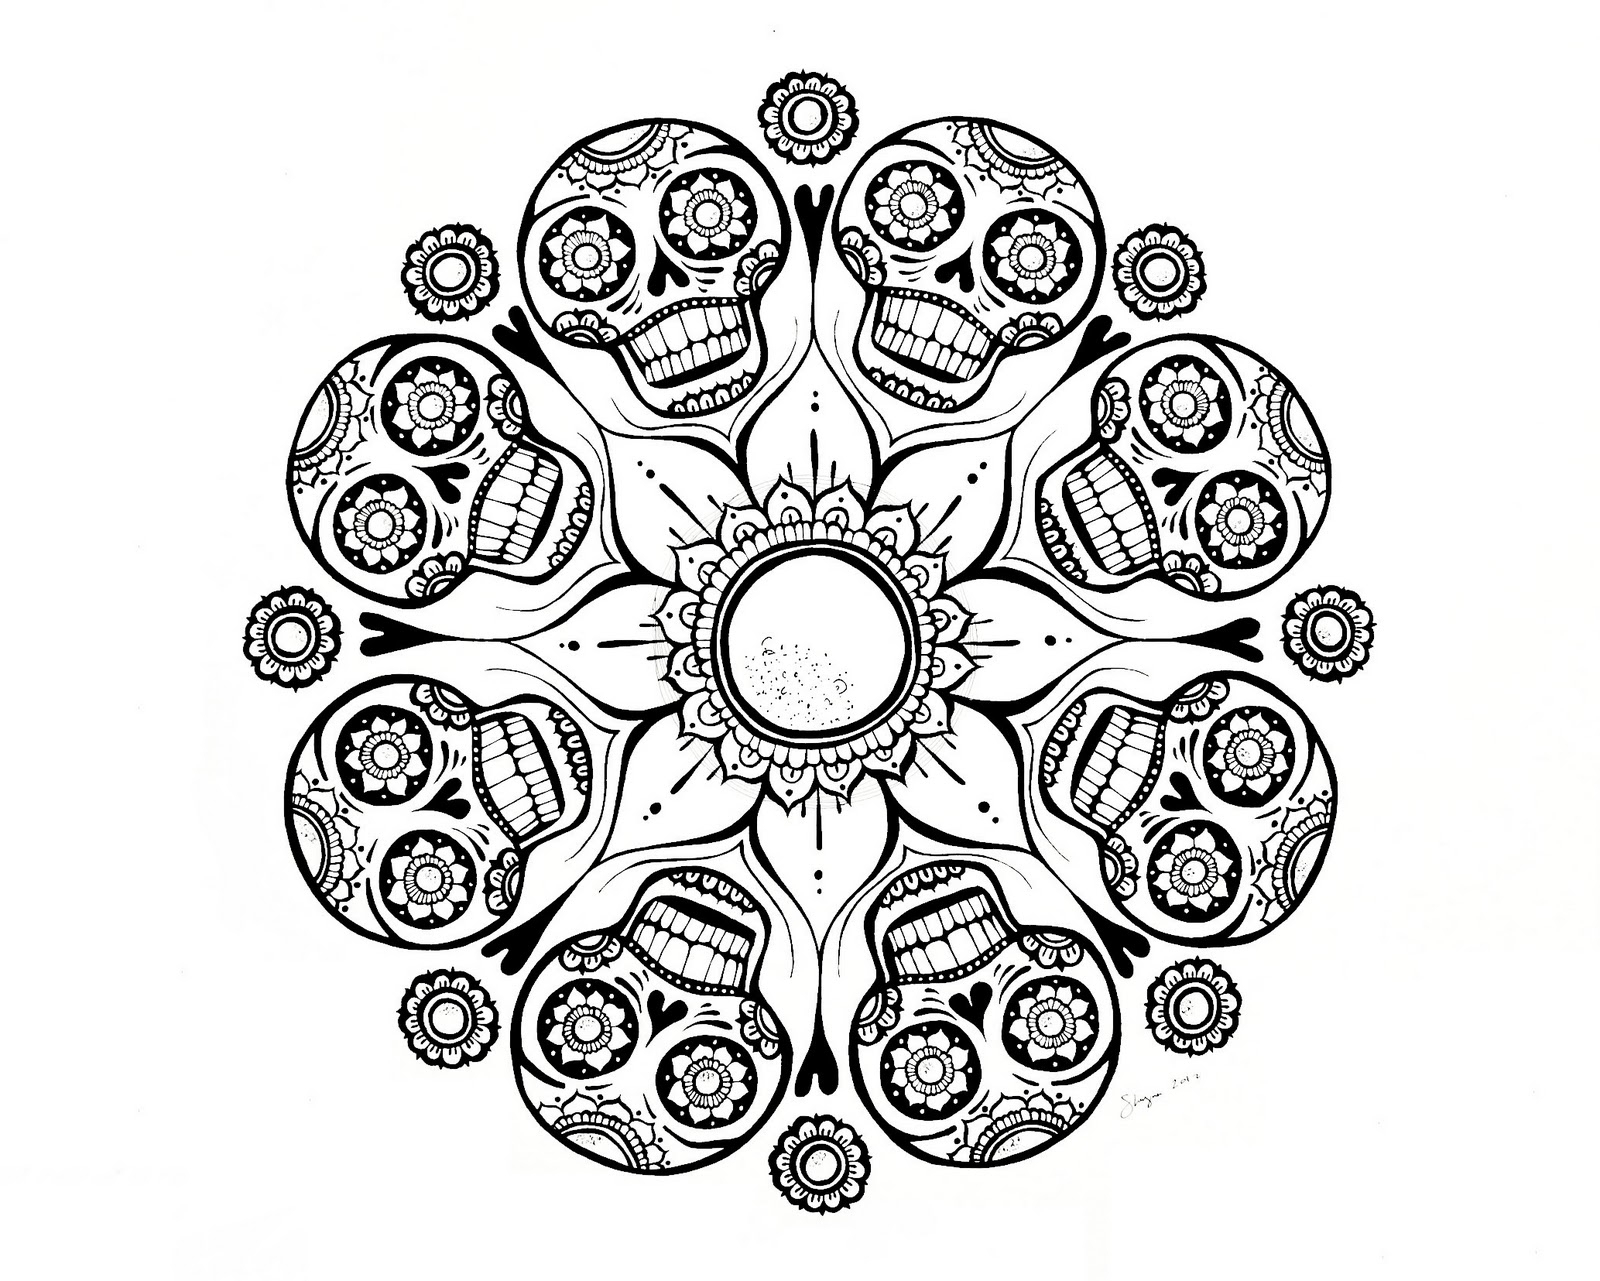 Mandala Coloring Pages Free Online Collection Mandala Coloring Pages Advanced Level Pictures